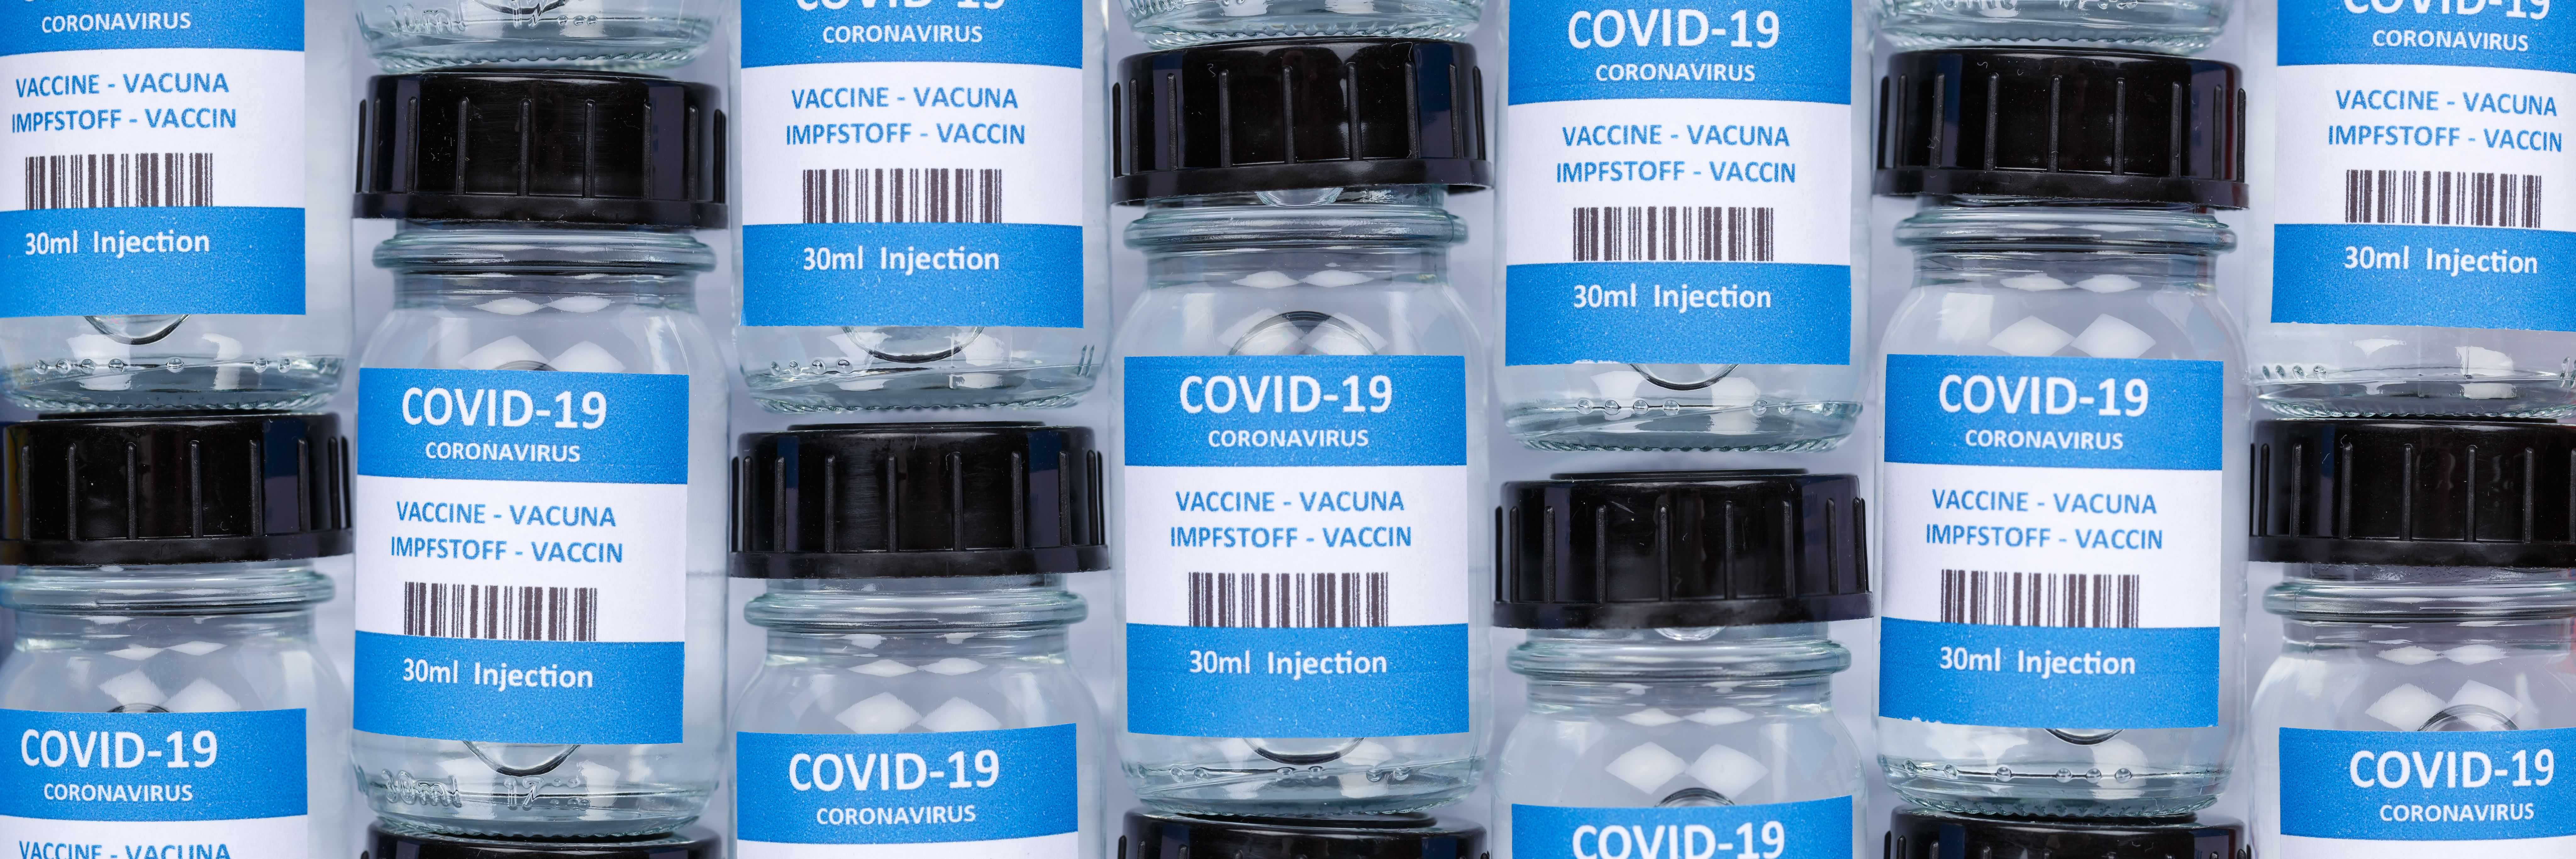 Five Ways Telehealth Will Help Support the COVID-19 Vaccine Rollout